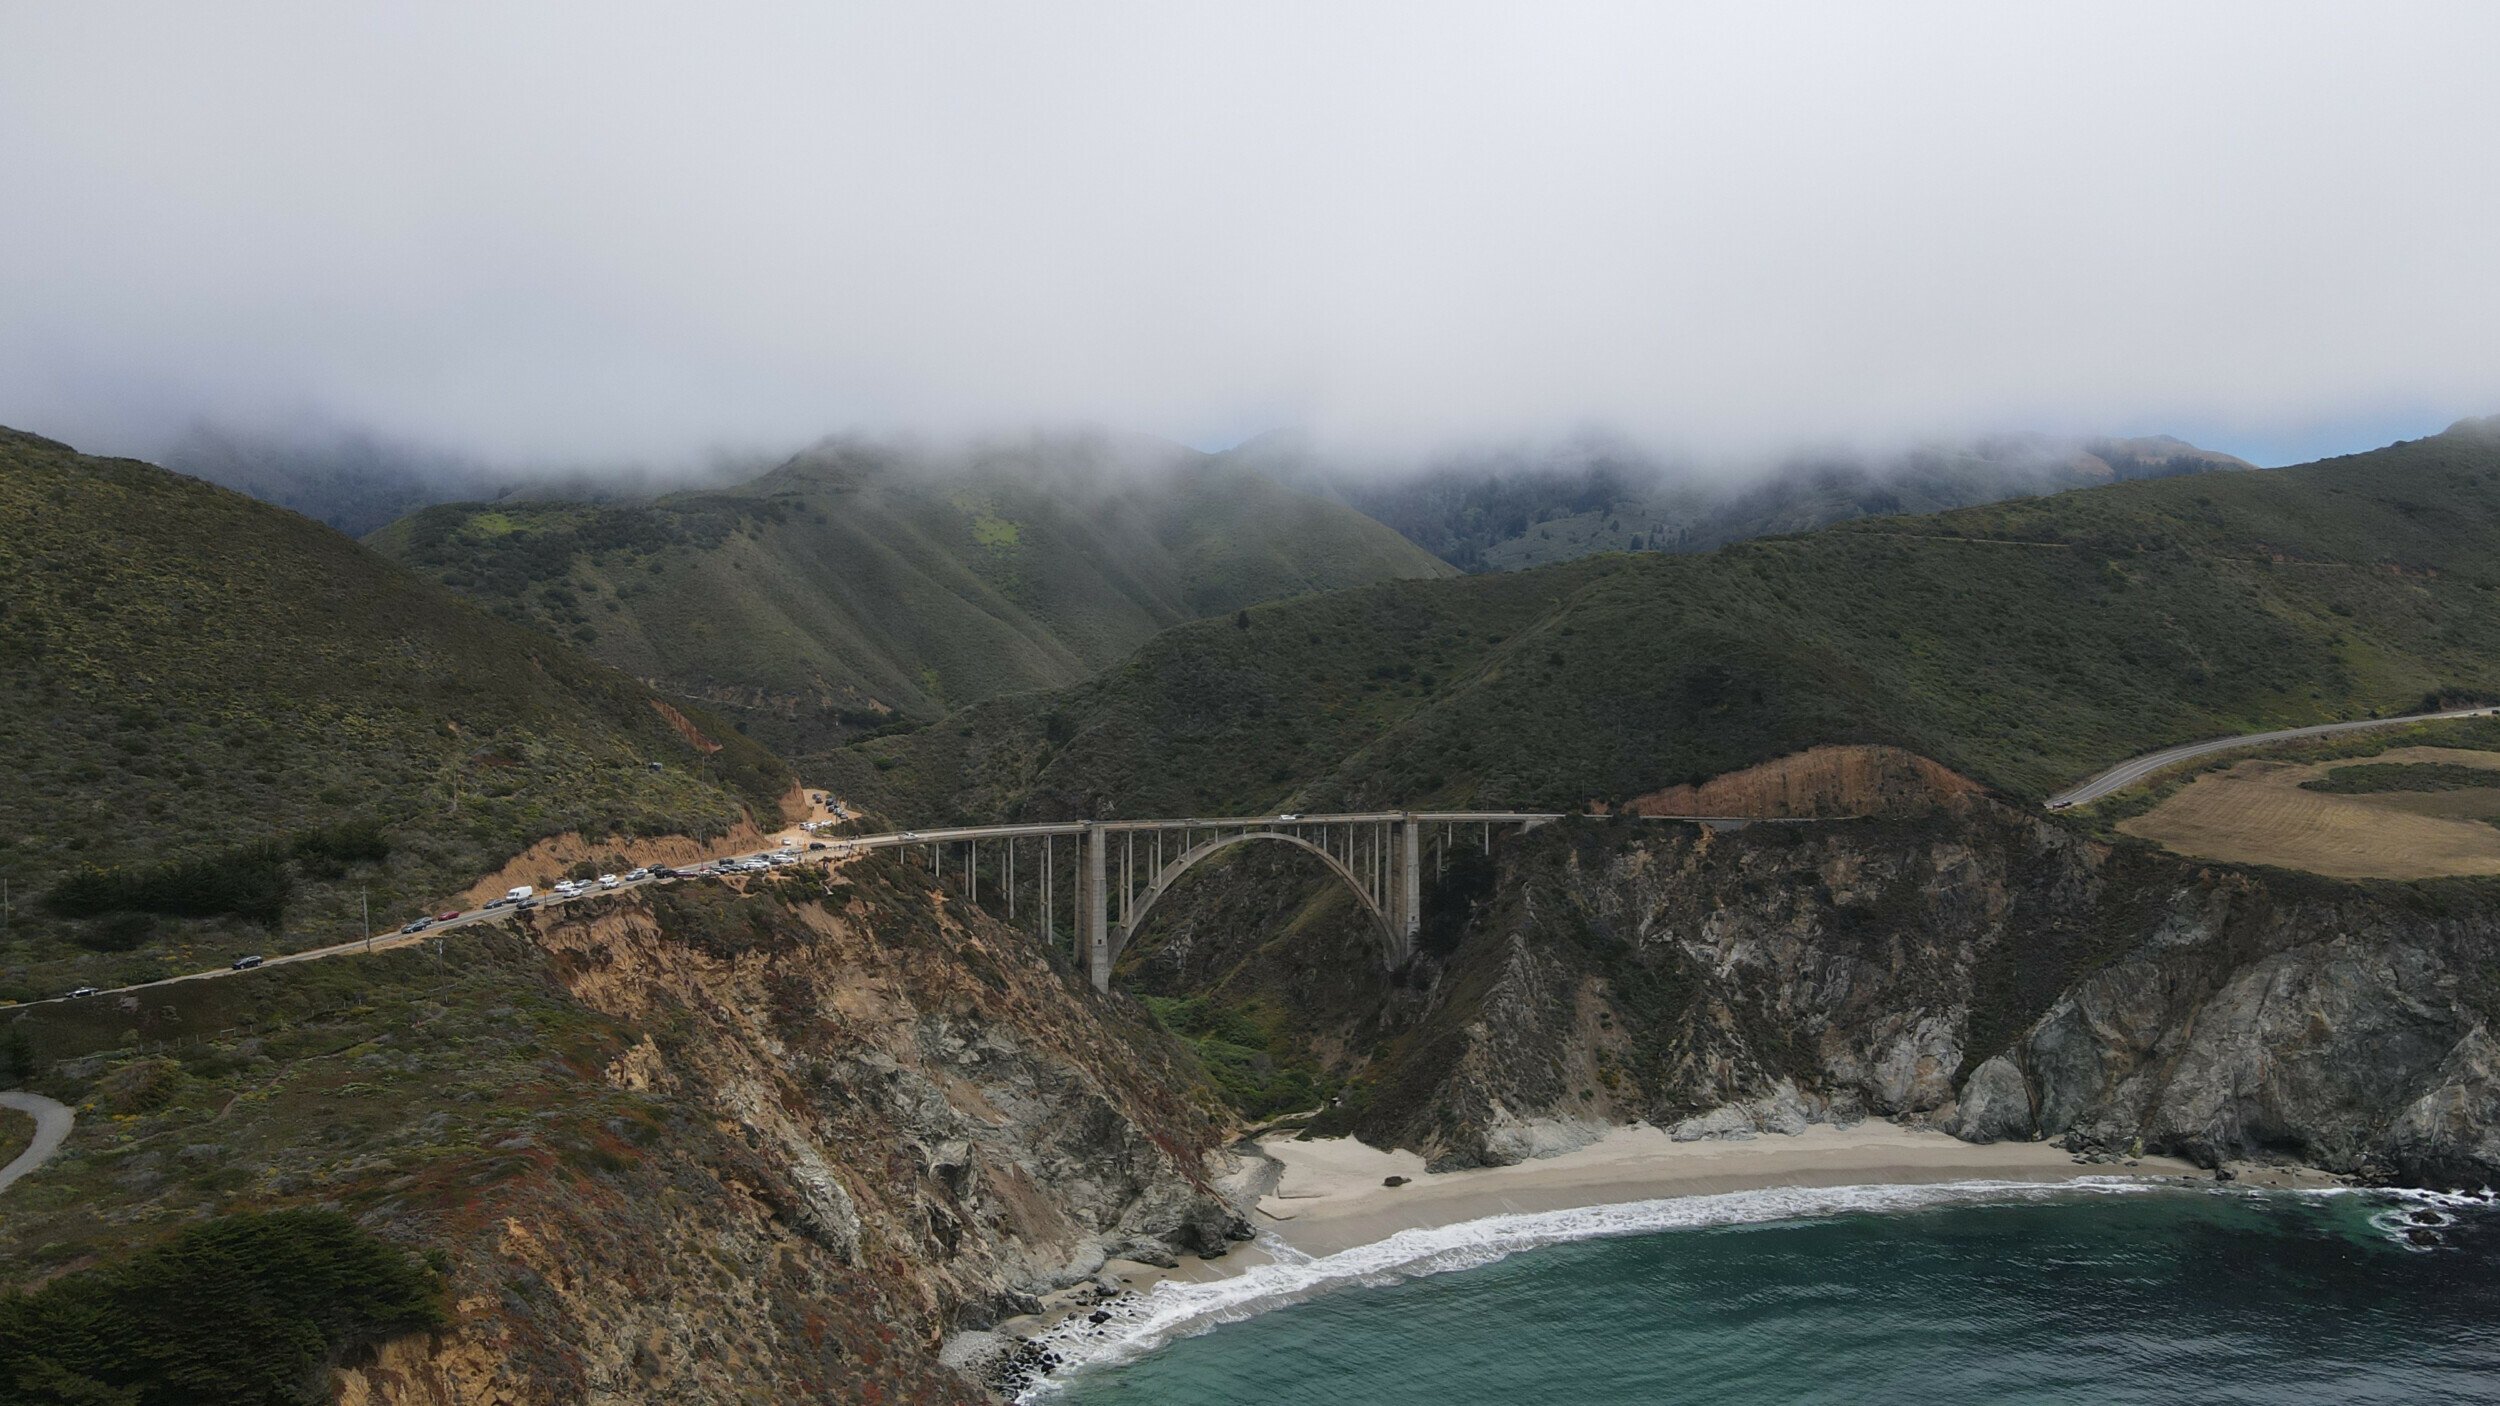 Aerial photograph of Bixby Bridge enveloped in fog, with the Pacific Ocean coastline and green mountains.